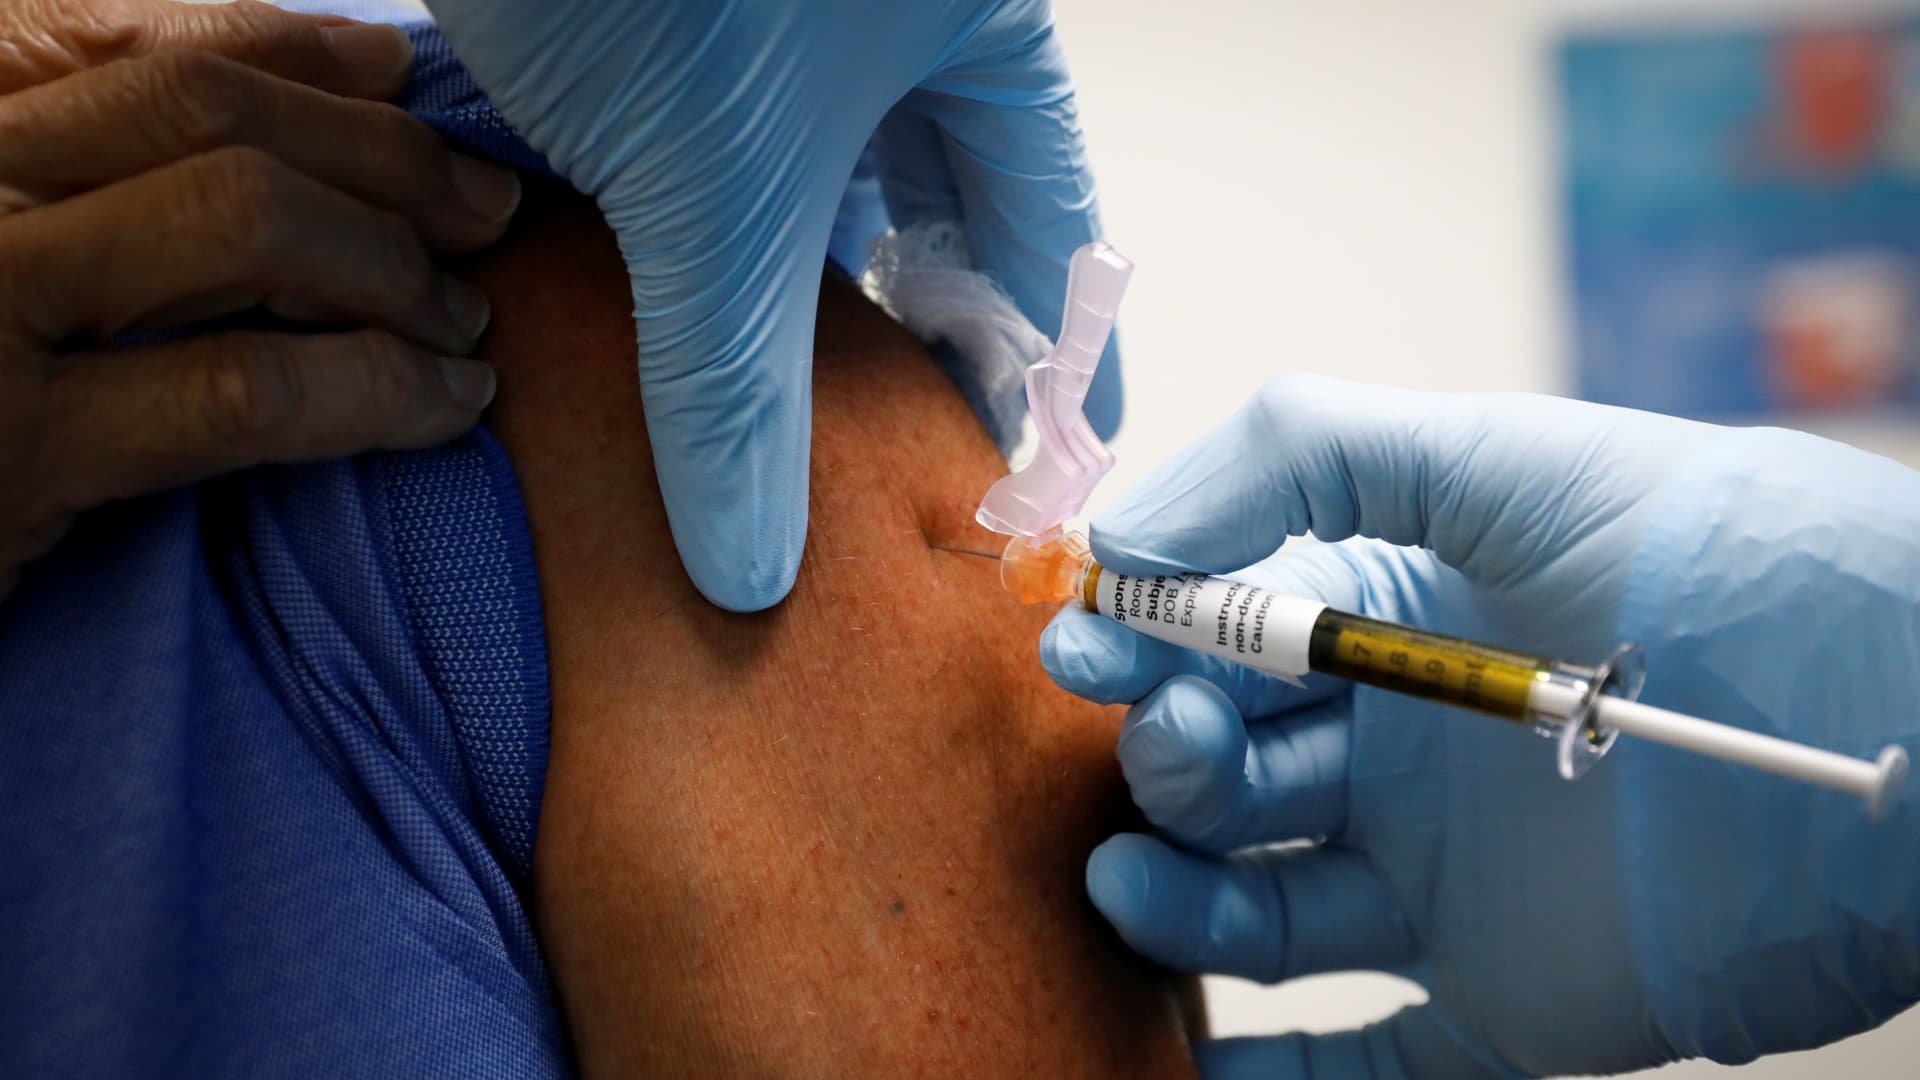 A volunteer is injected with a vaccine as he participates in a coronavirus disease (COVID-19) vaccination study at the Research Centers of America, in Hollywood, Florida, U.S., September 24, 2020.